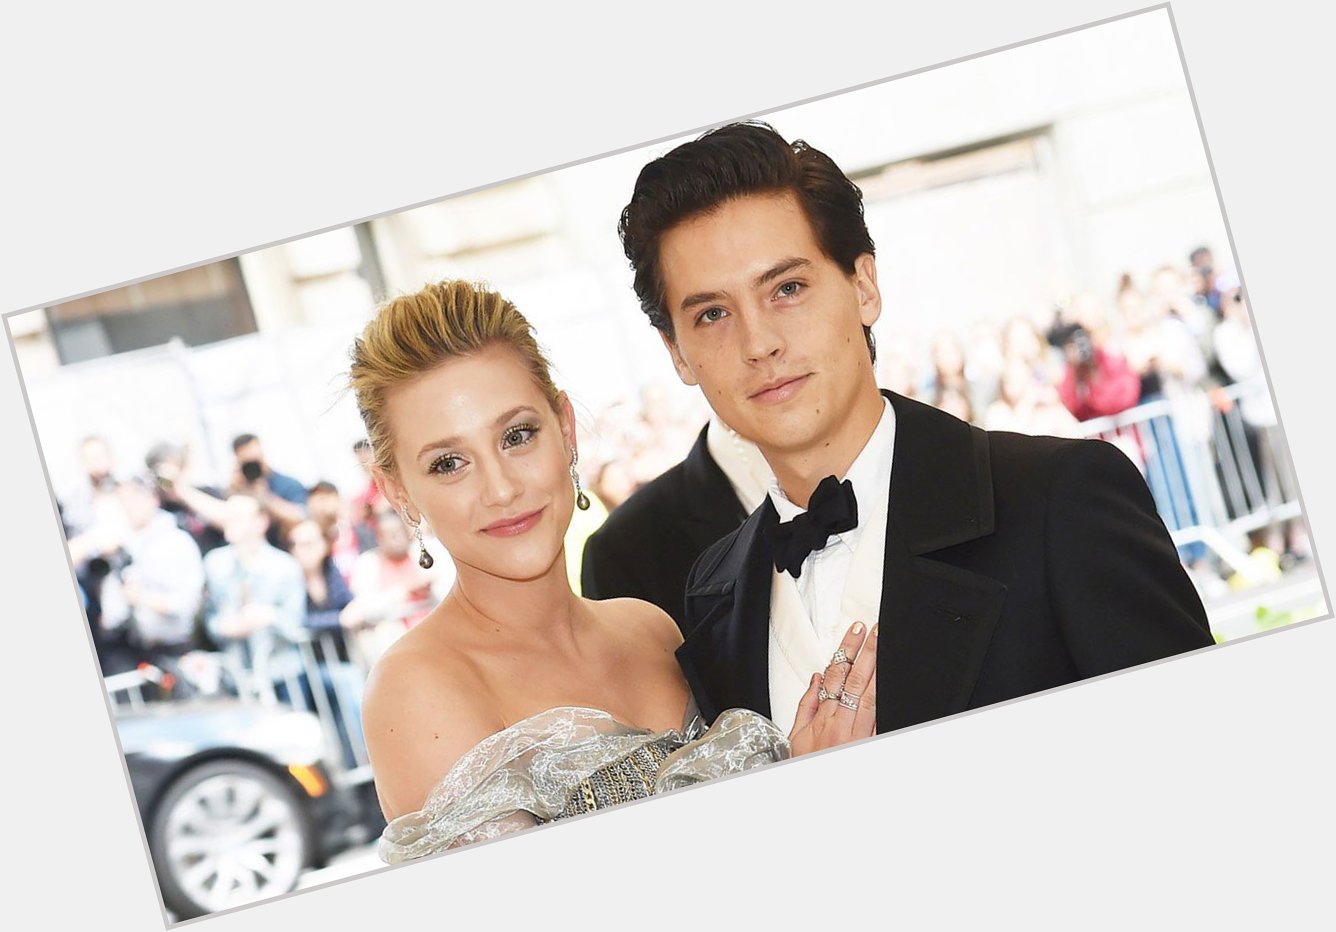 Lili Reinhart Wishes Cole Sprouse a Happy Birthday on Instagram  